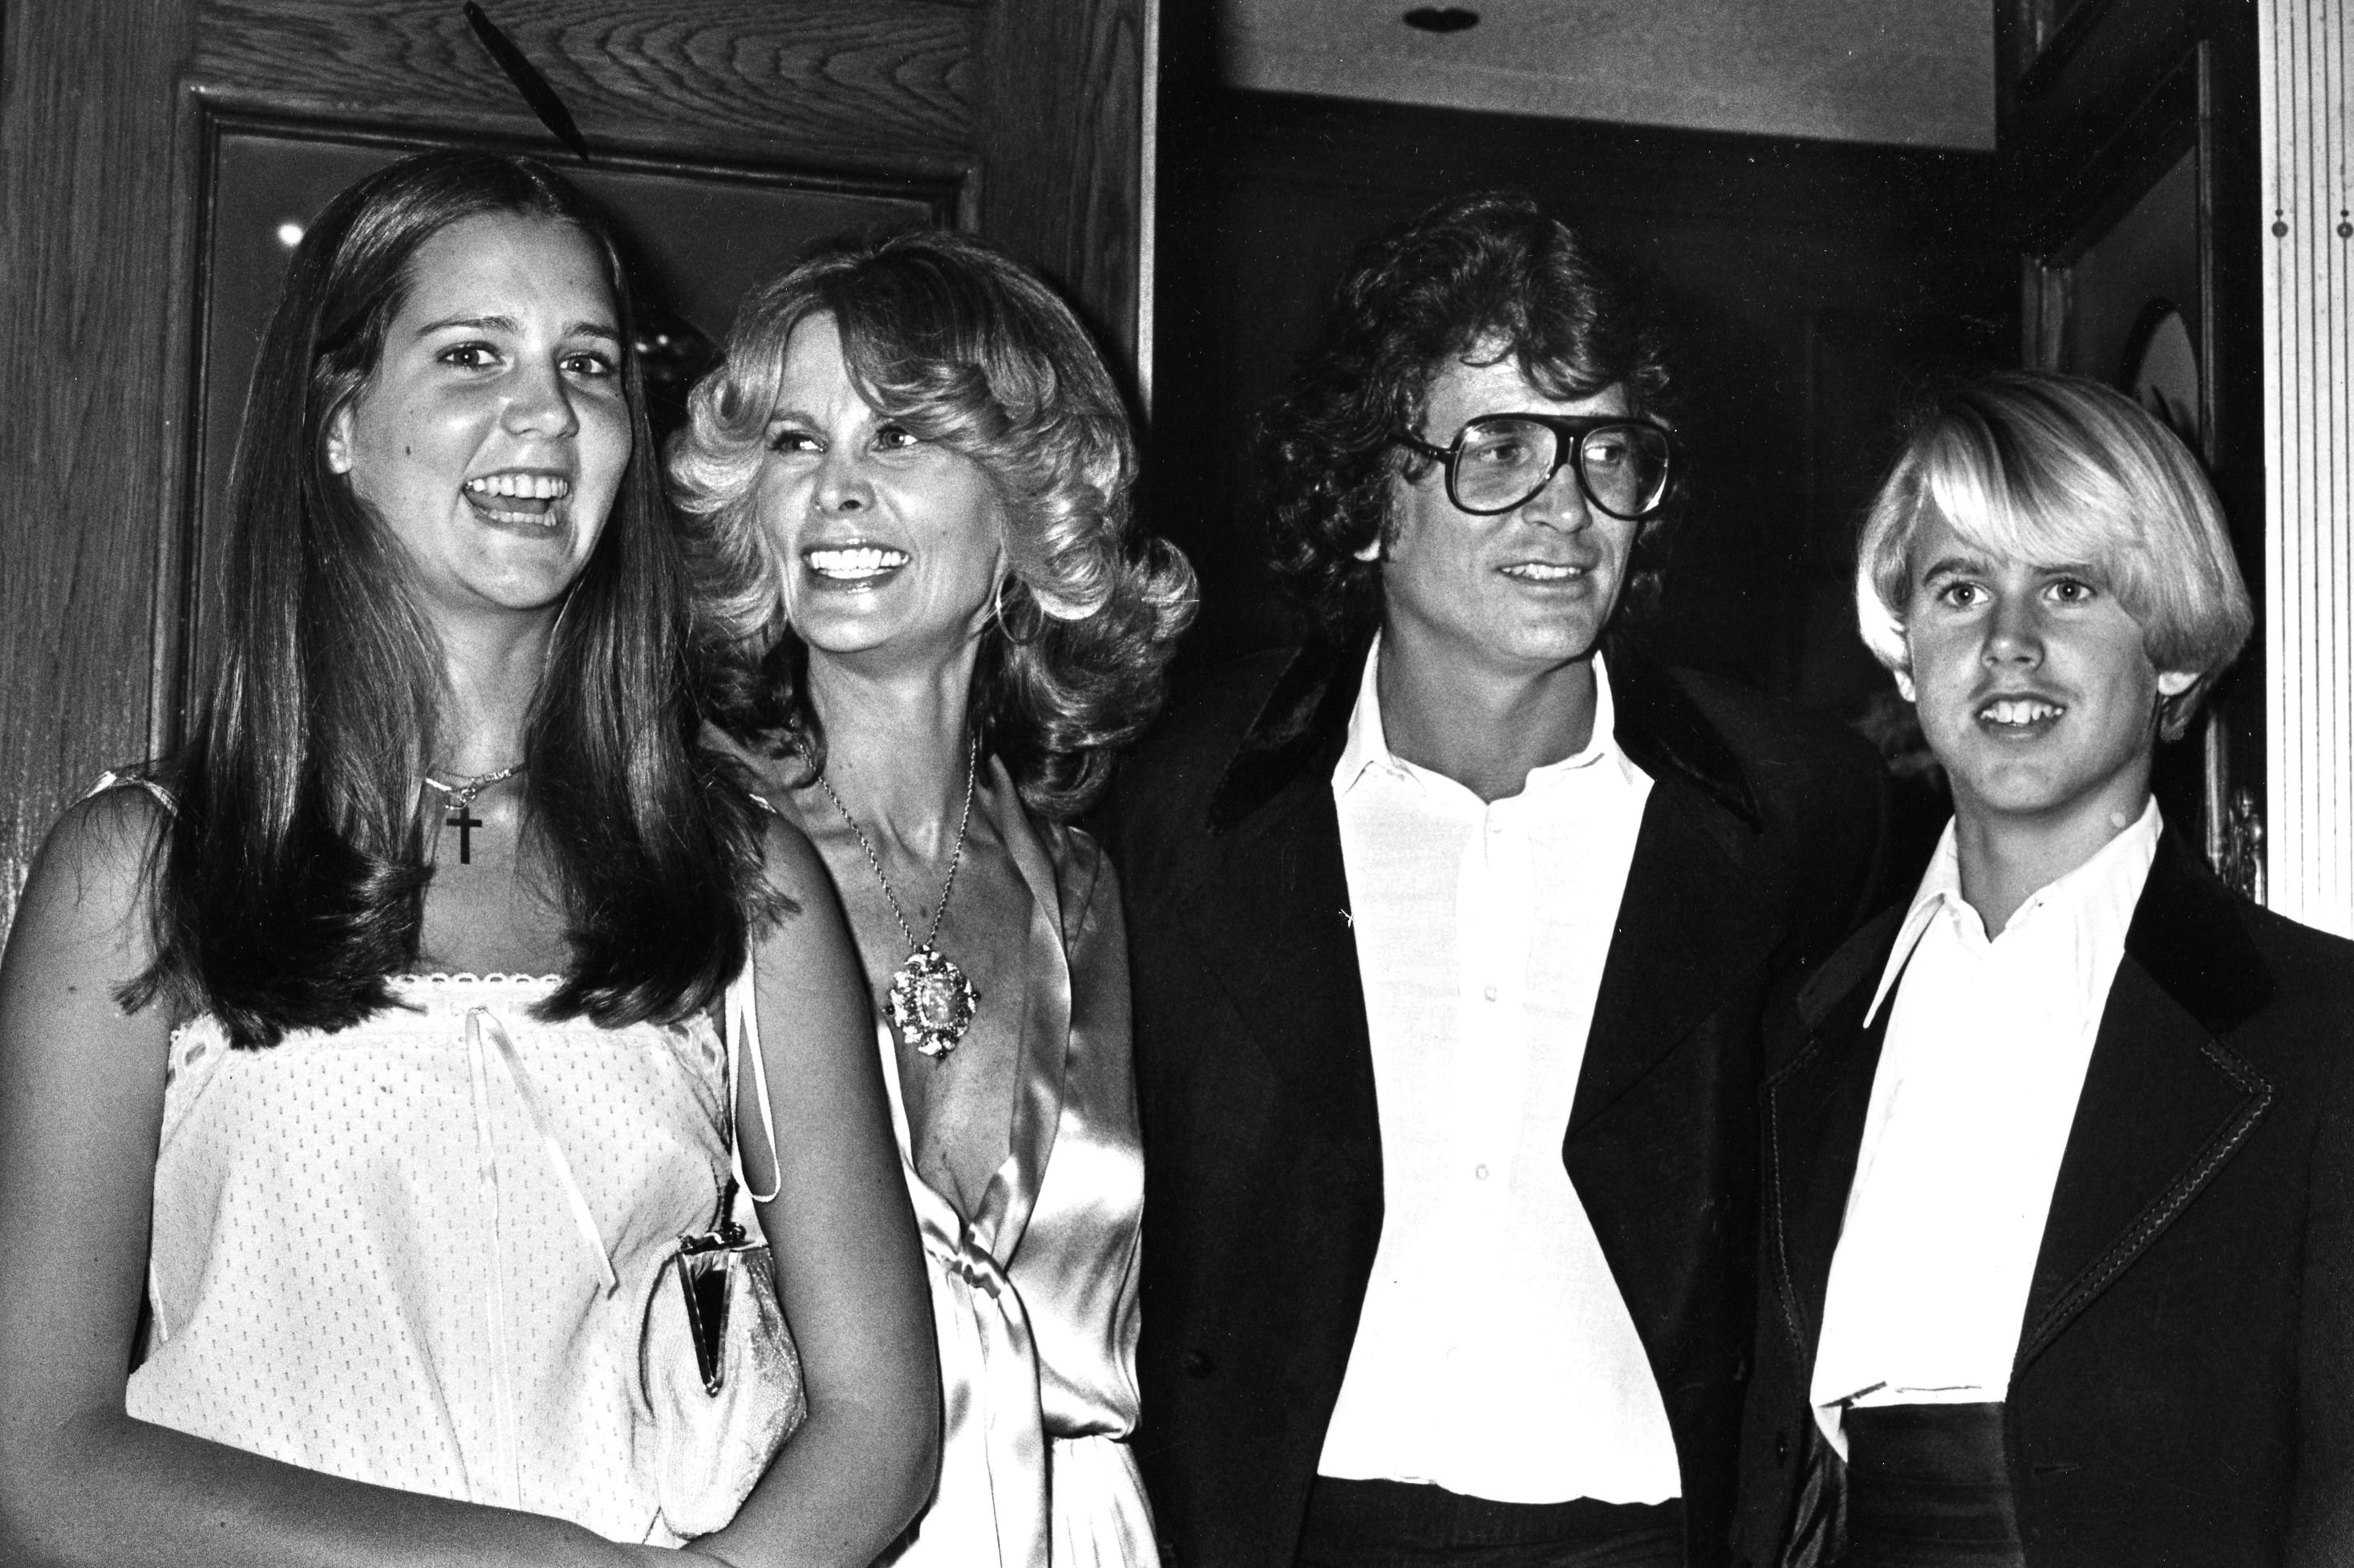 Leslie Landon, Marjorie Lynn Noe, Michael Landon Sr. and Michael Landon Jr. at the 4th Annual People's Choice Awards on February 20, 1978, in Los Angeles, California. | Source: Getty Images